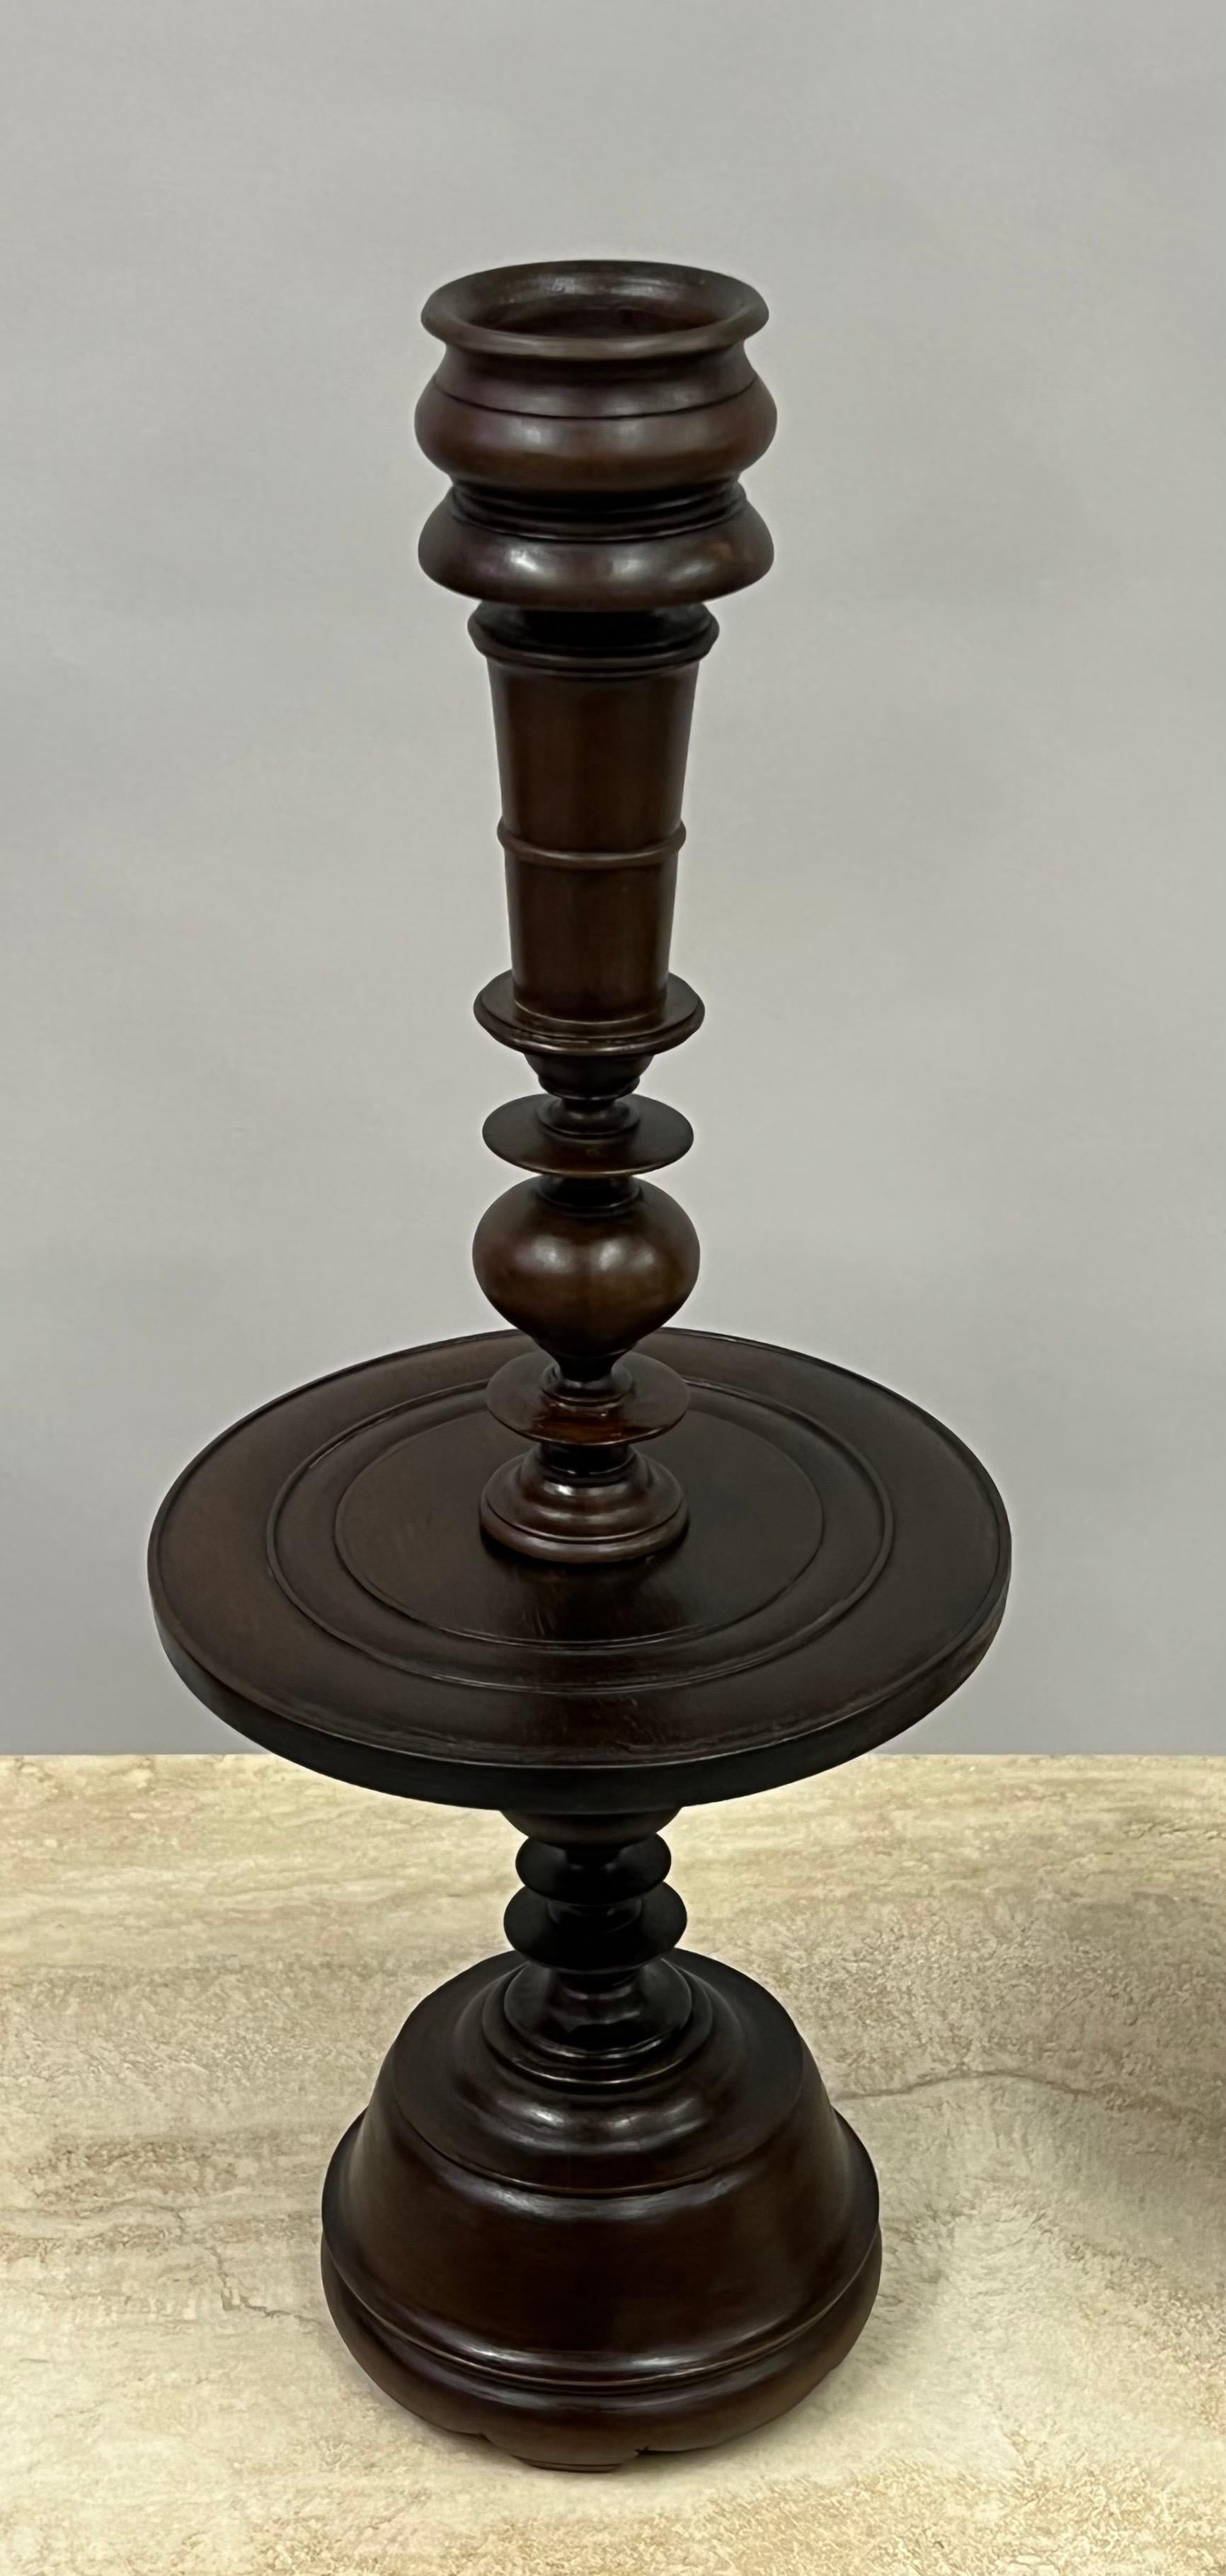 20th Century Pair of French Colonial Carved Teak Wood Table Lamp Bases or Candelabras c. 1930 For Sale